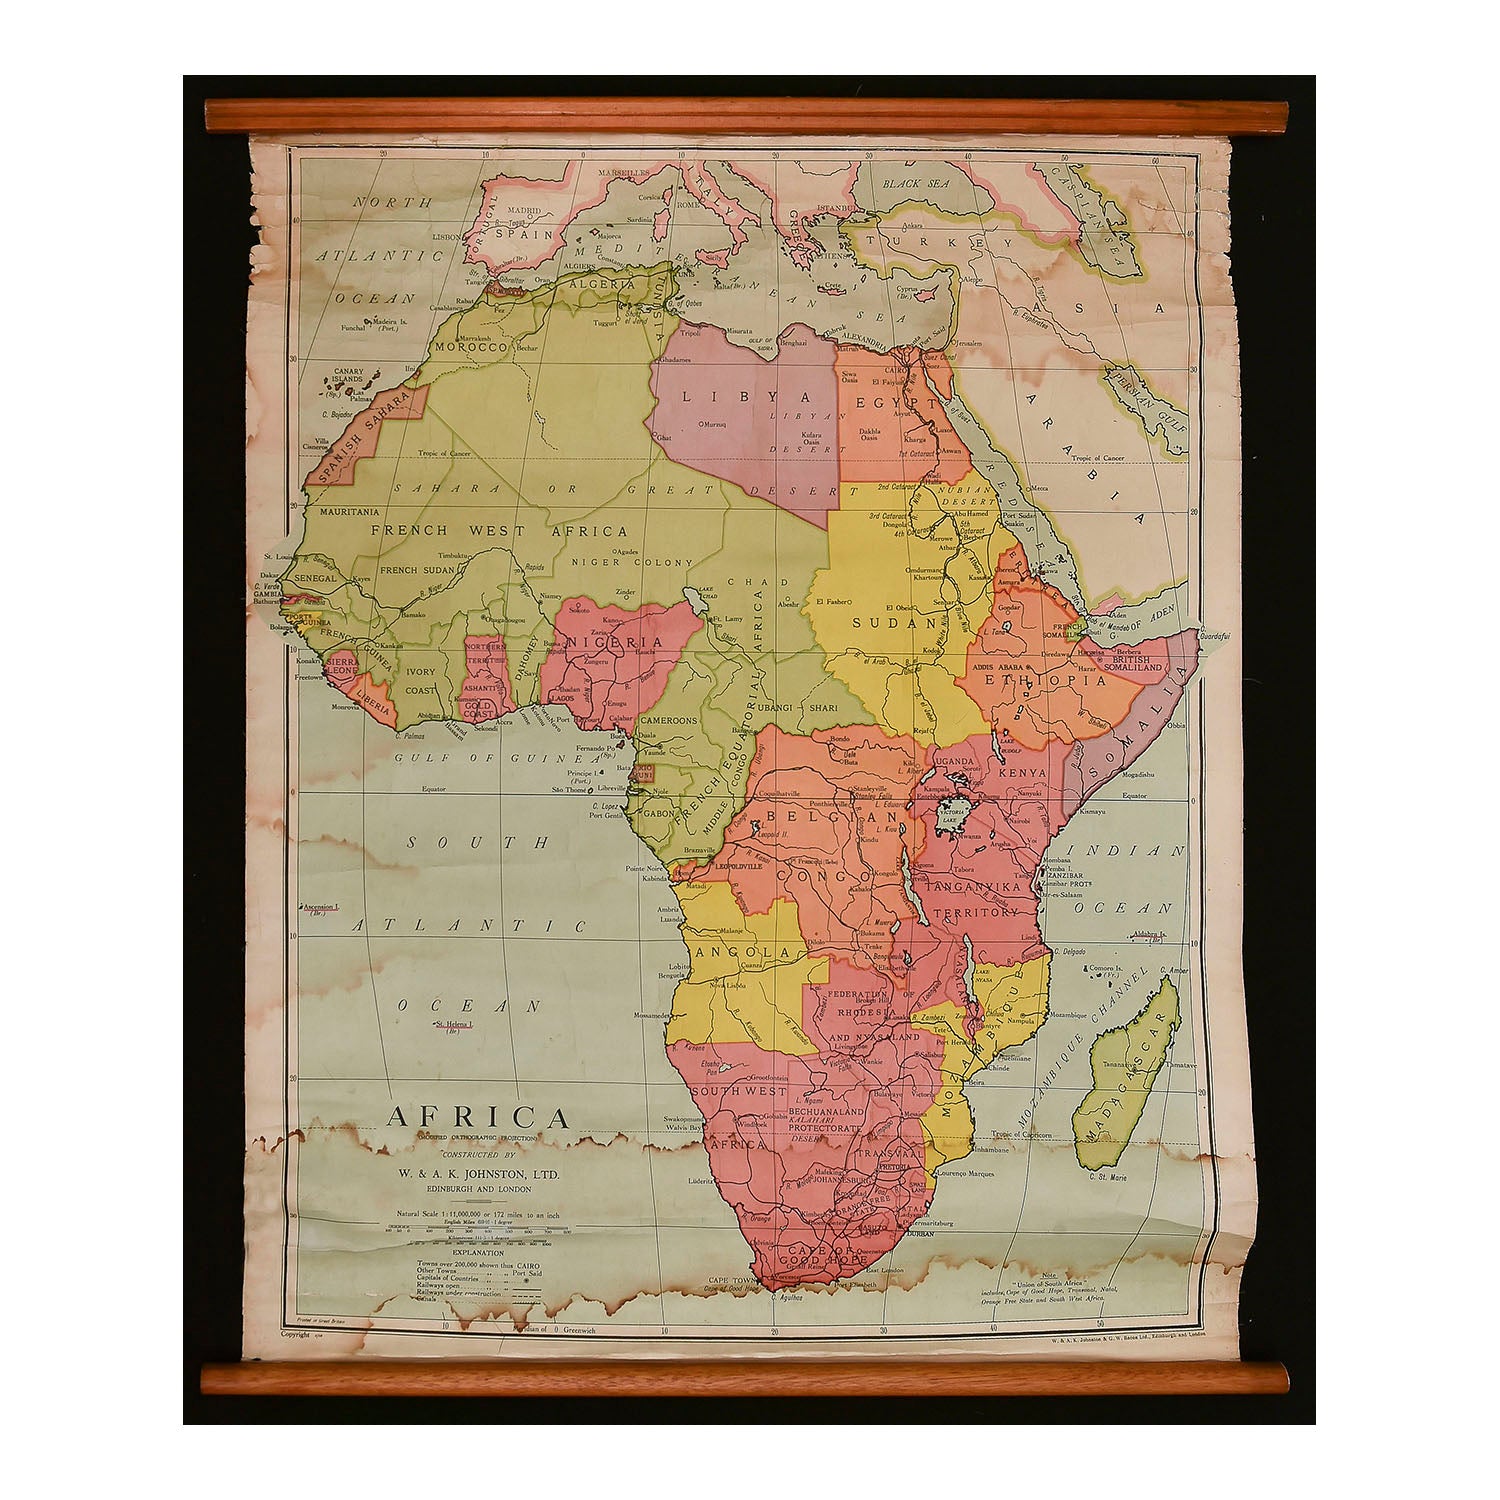 original linen backed map of Africa on pine rollers, published by W & AK Johnston Limited, 1956. Scale 1:11,000,000. Map shows country names and boundaries as they existed at the time.